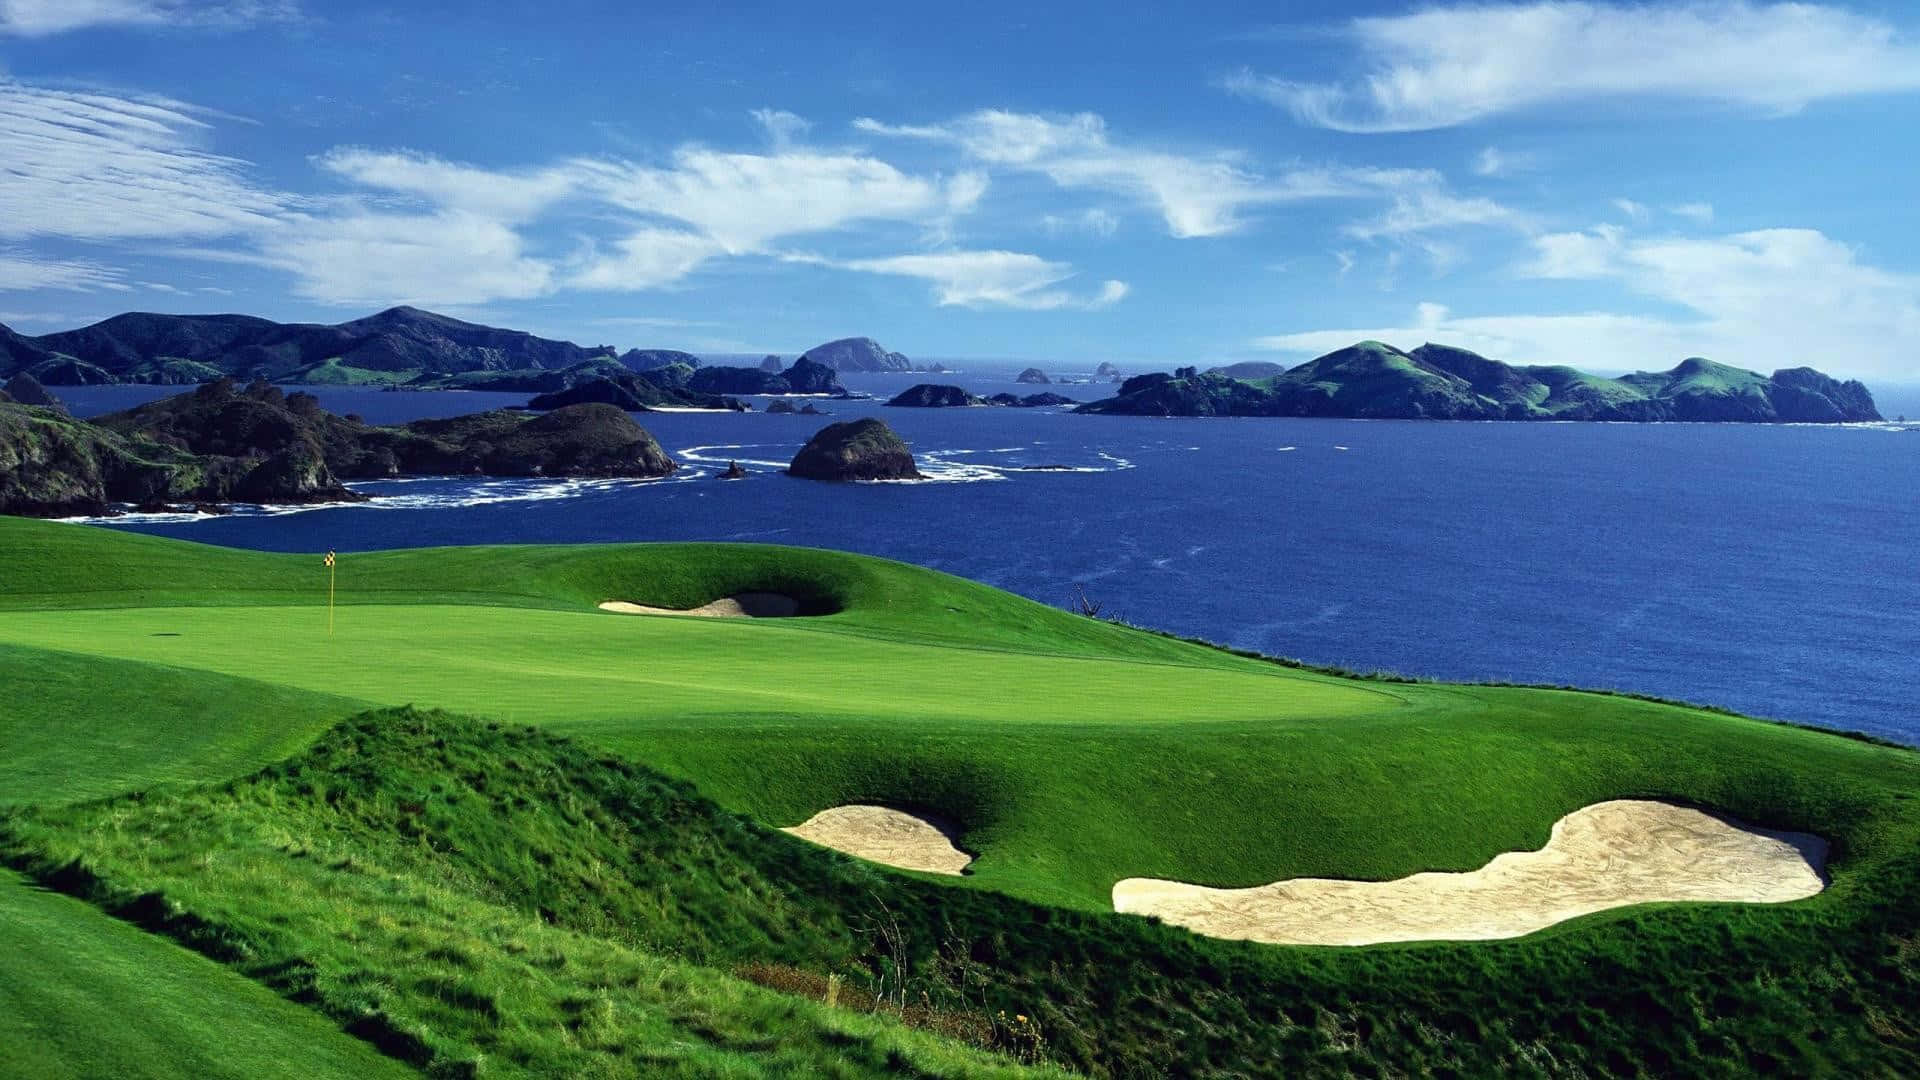 A Golf Course With A Green Bunker And Ocean